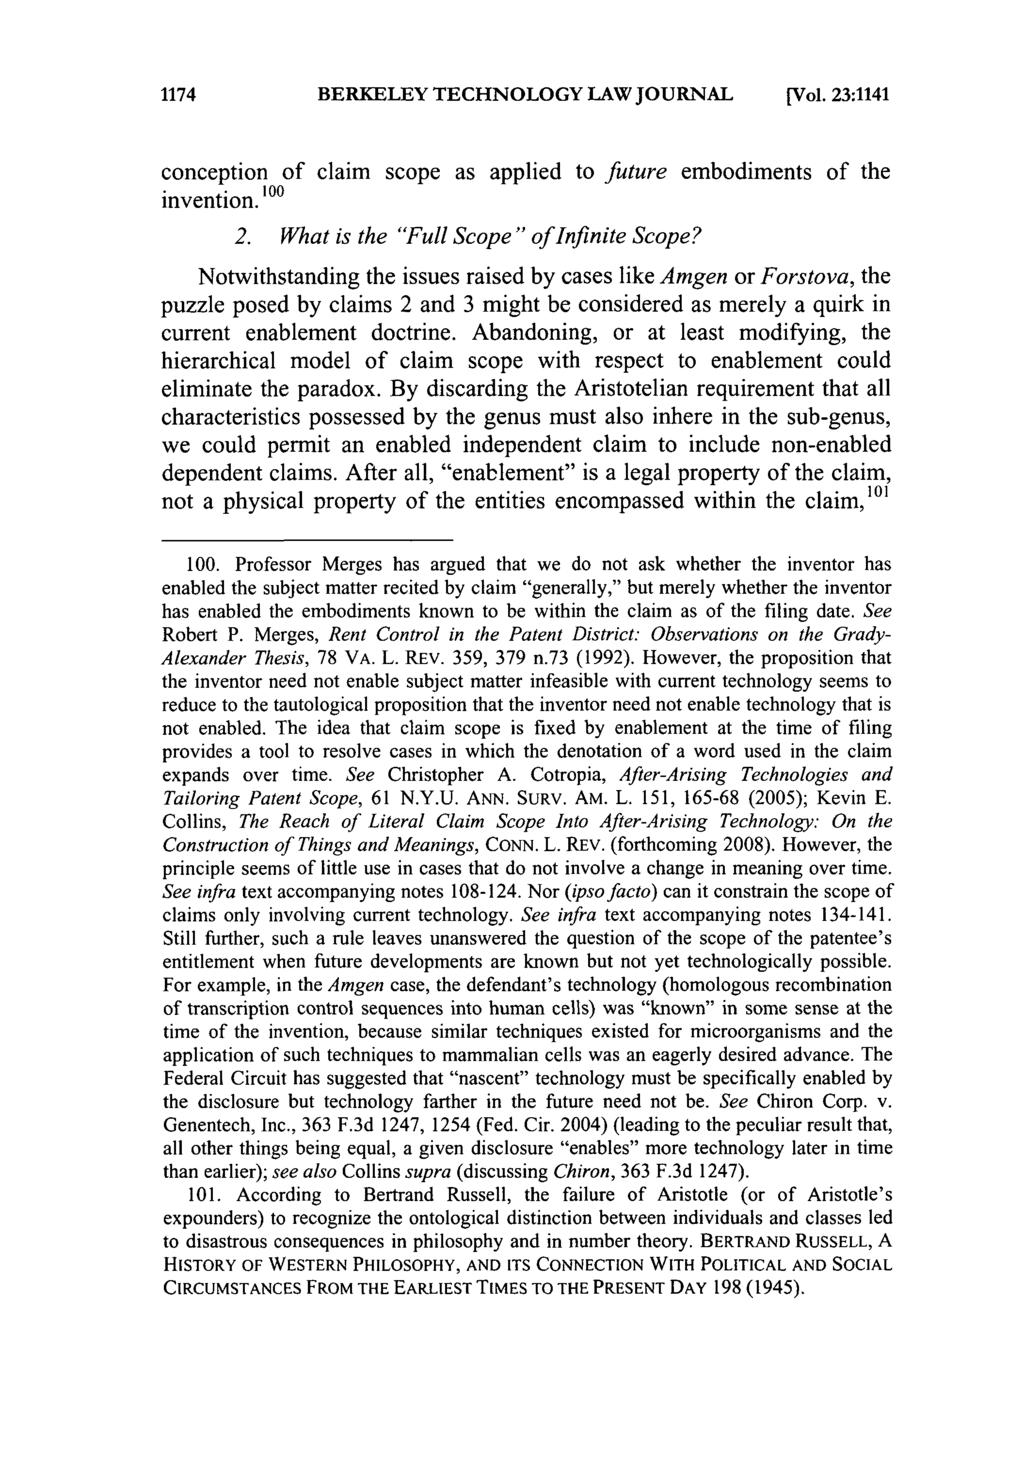 1174 BERKELEY TECHNOLOGY LAW JOURNAL [Vol. 23:1141 conception of claim scope as applied to future embodiments of the invention. 100 2. What is the "Full Scope" of Infinite Scope?